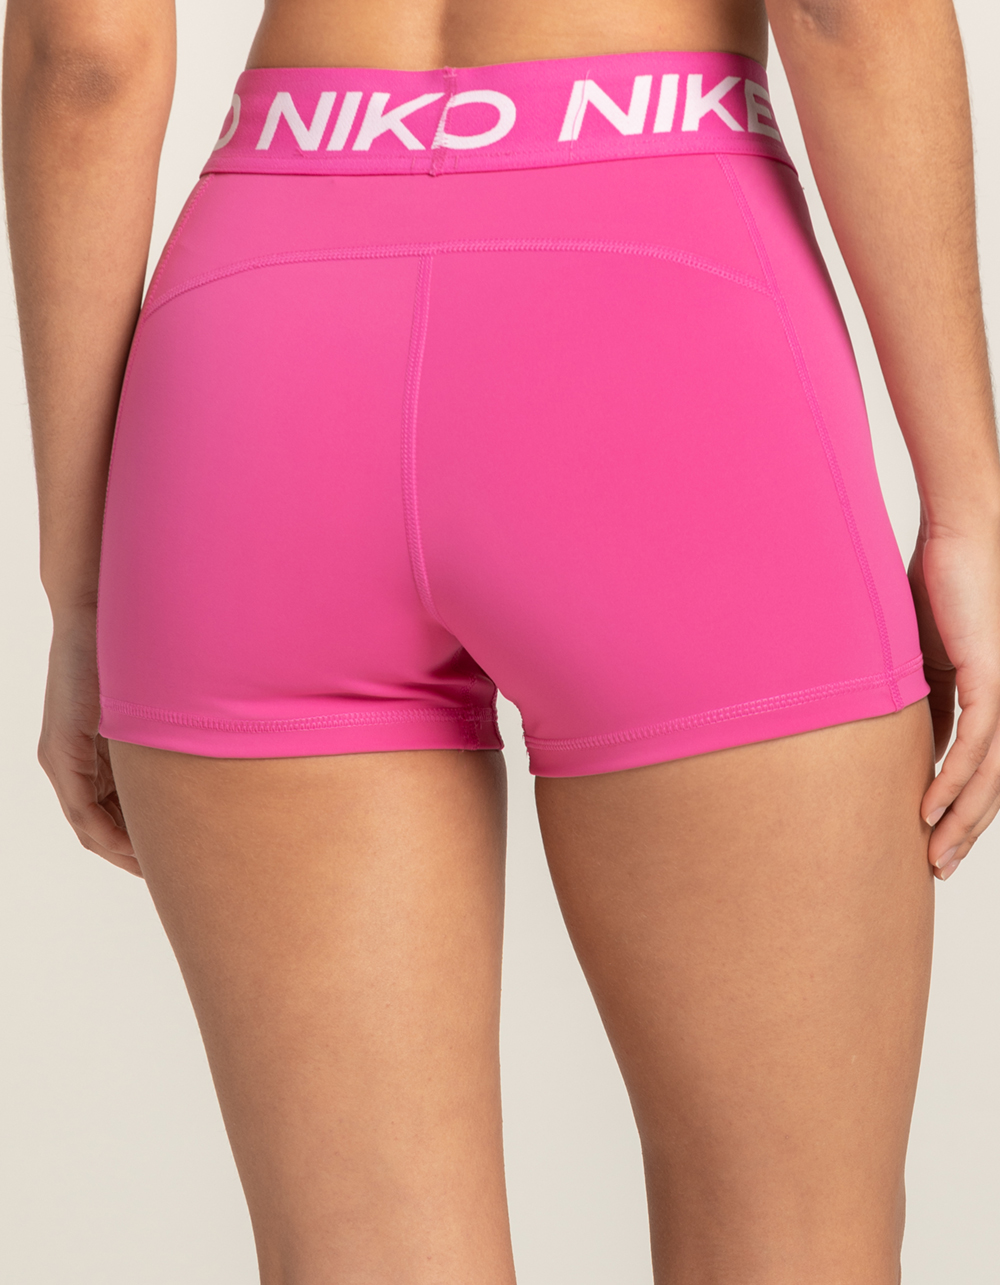 Pink Women's Compression Shorts, Pole Shorts